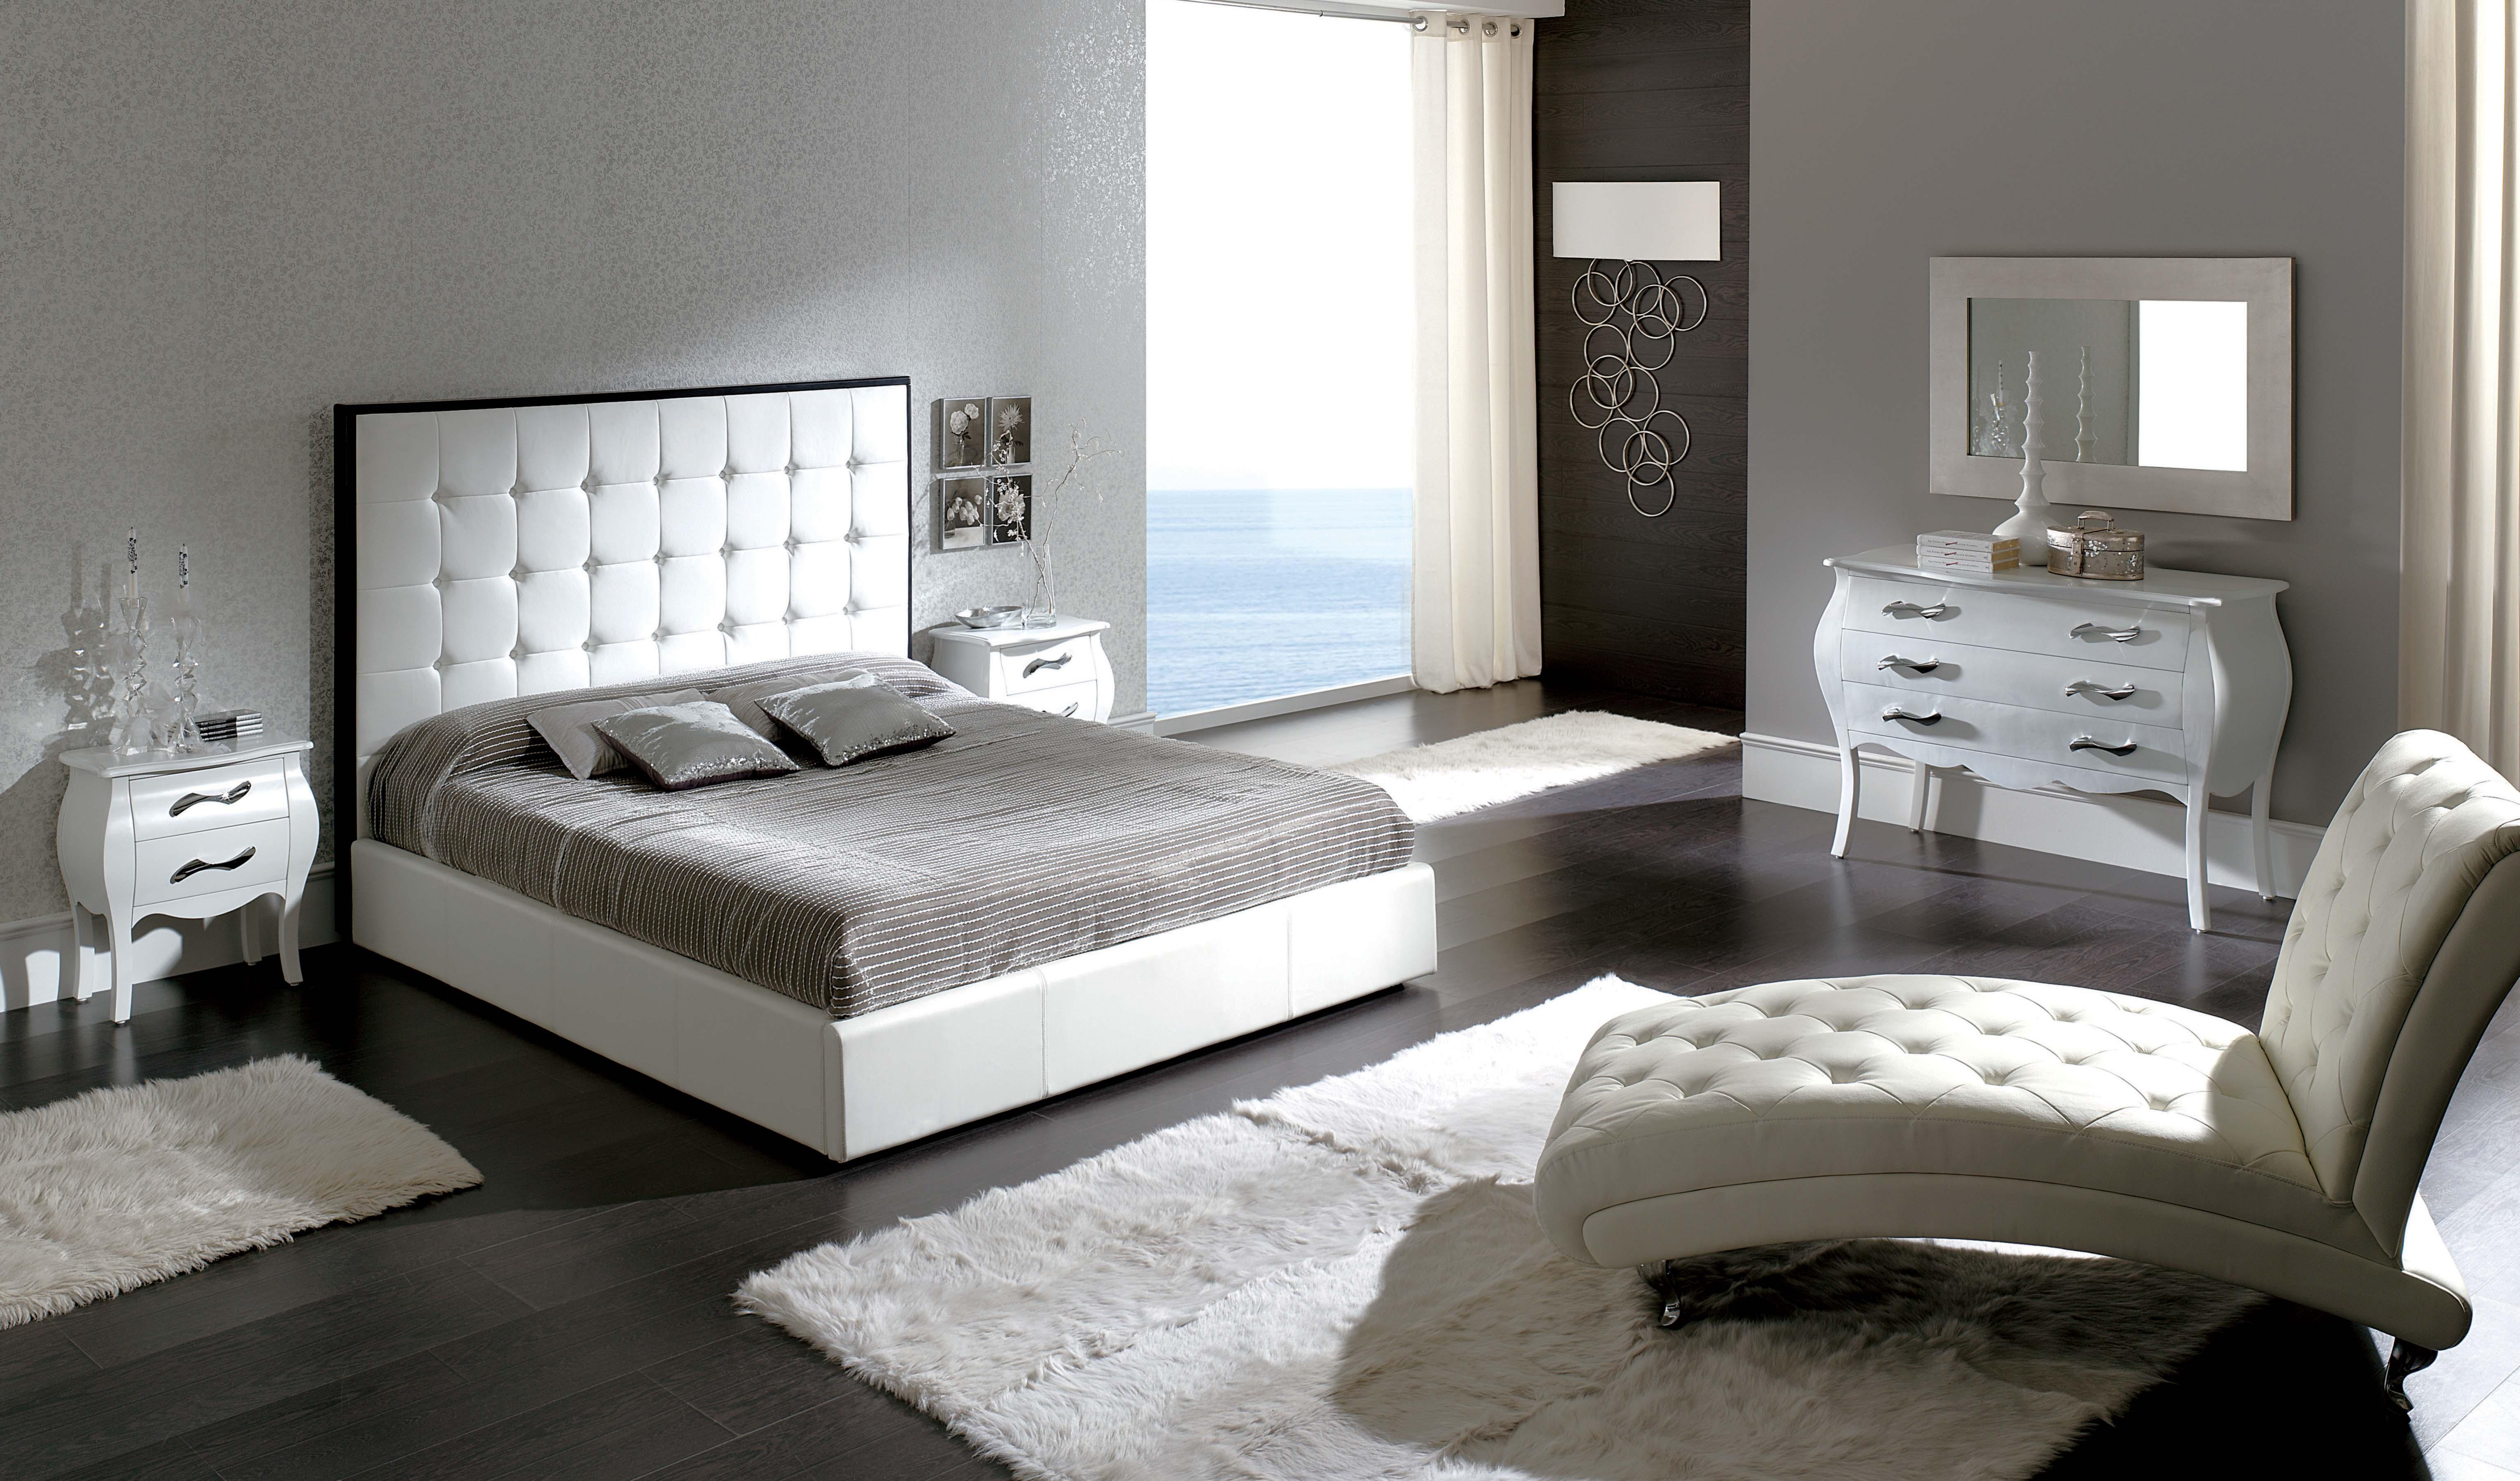 

    
ESF-Penelope 622 White-Q-Set-5 ESF Penelope 622 White Queen Storage Bedroom Set 5 Contemporary Made In Spain
